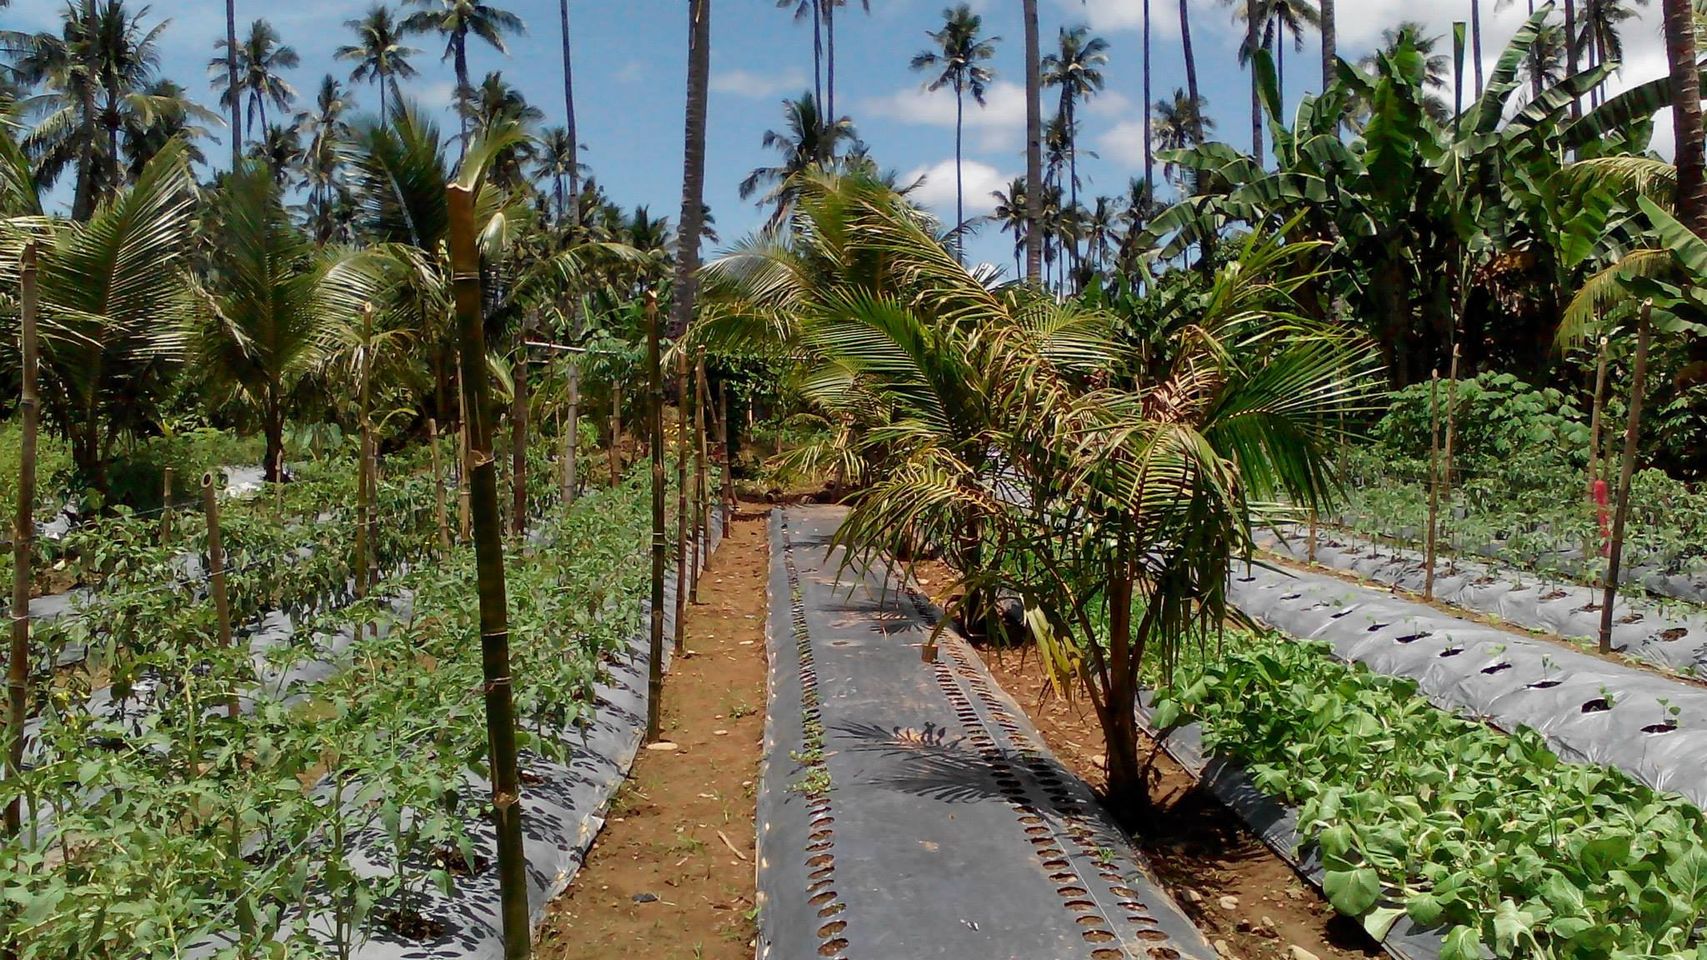 Coconut trees with vegetable intercropping